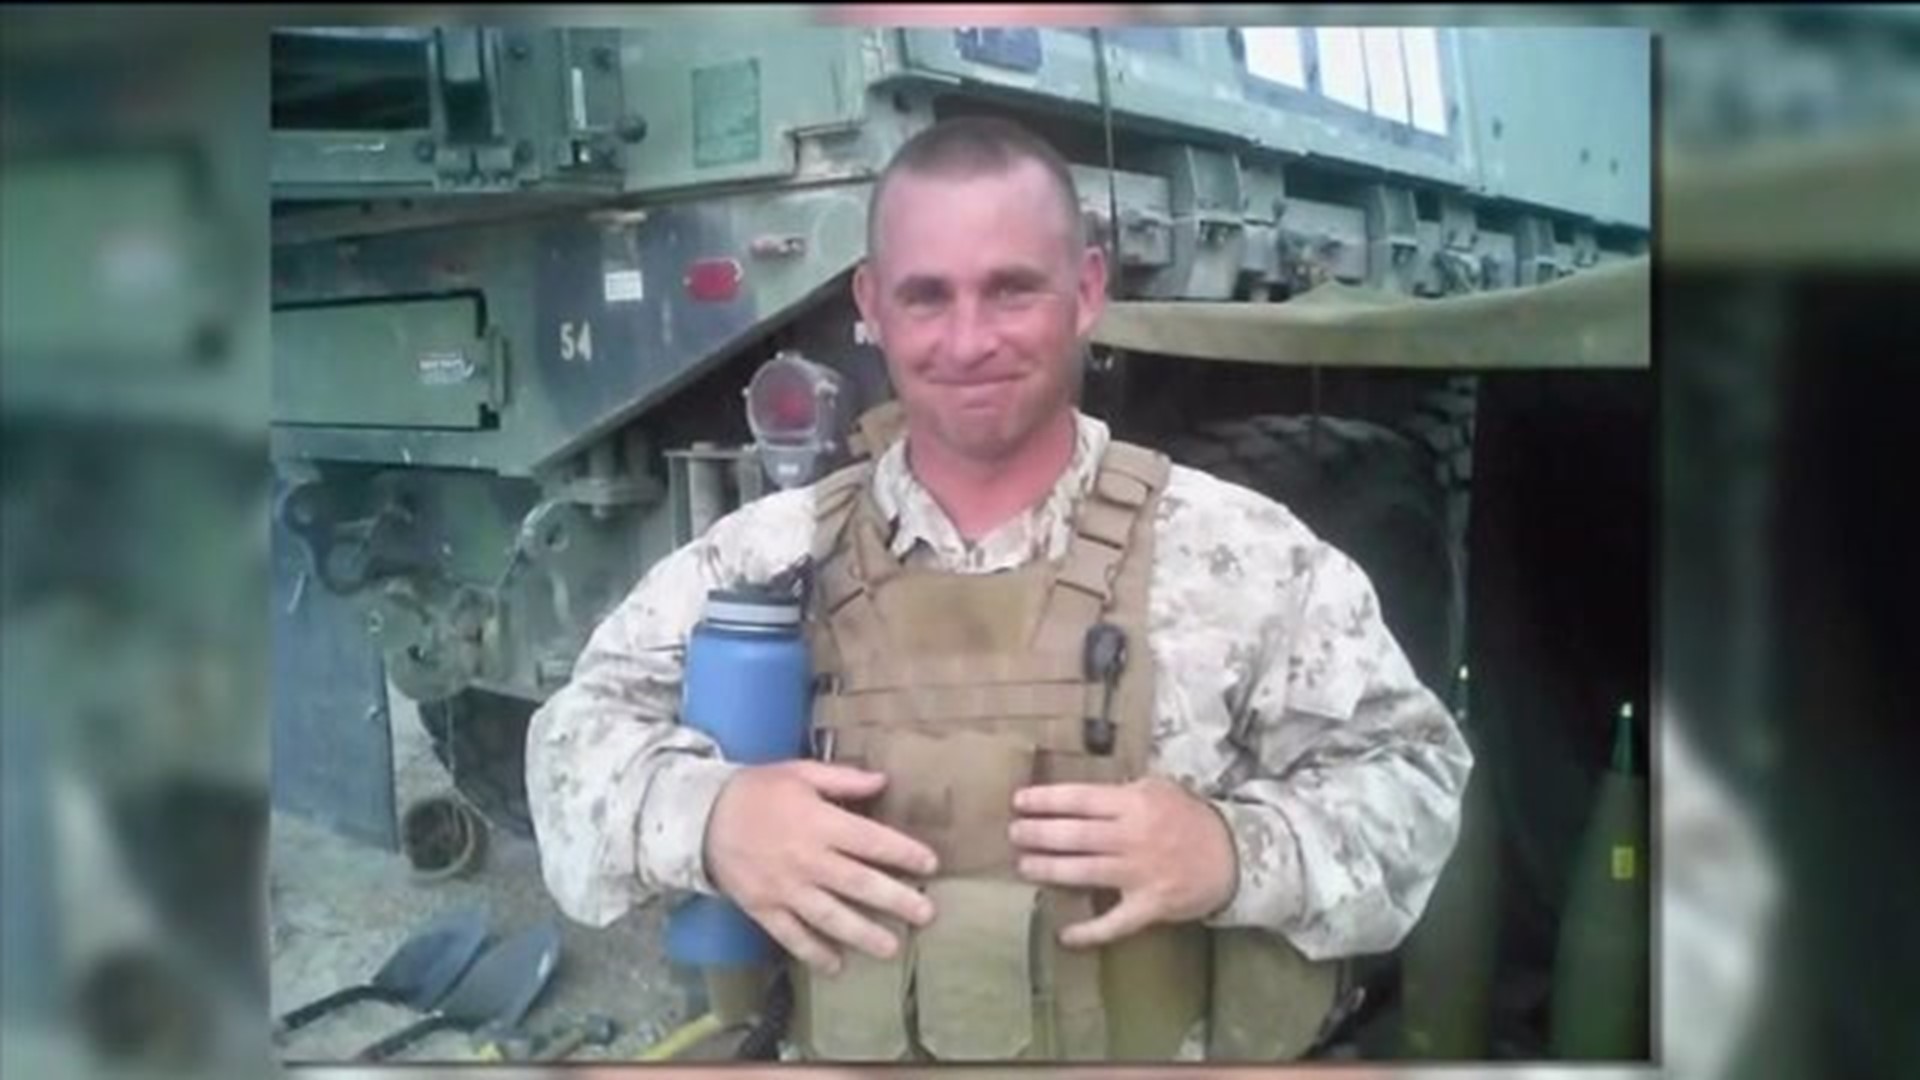 Gunnery Sgt. Thomas Sullivan laid to rest after being killed in Tennessee rampage